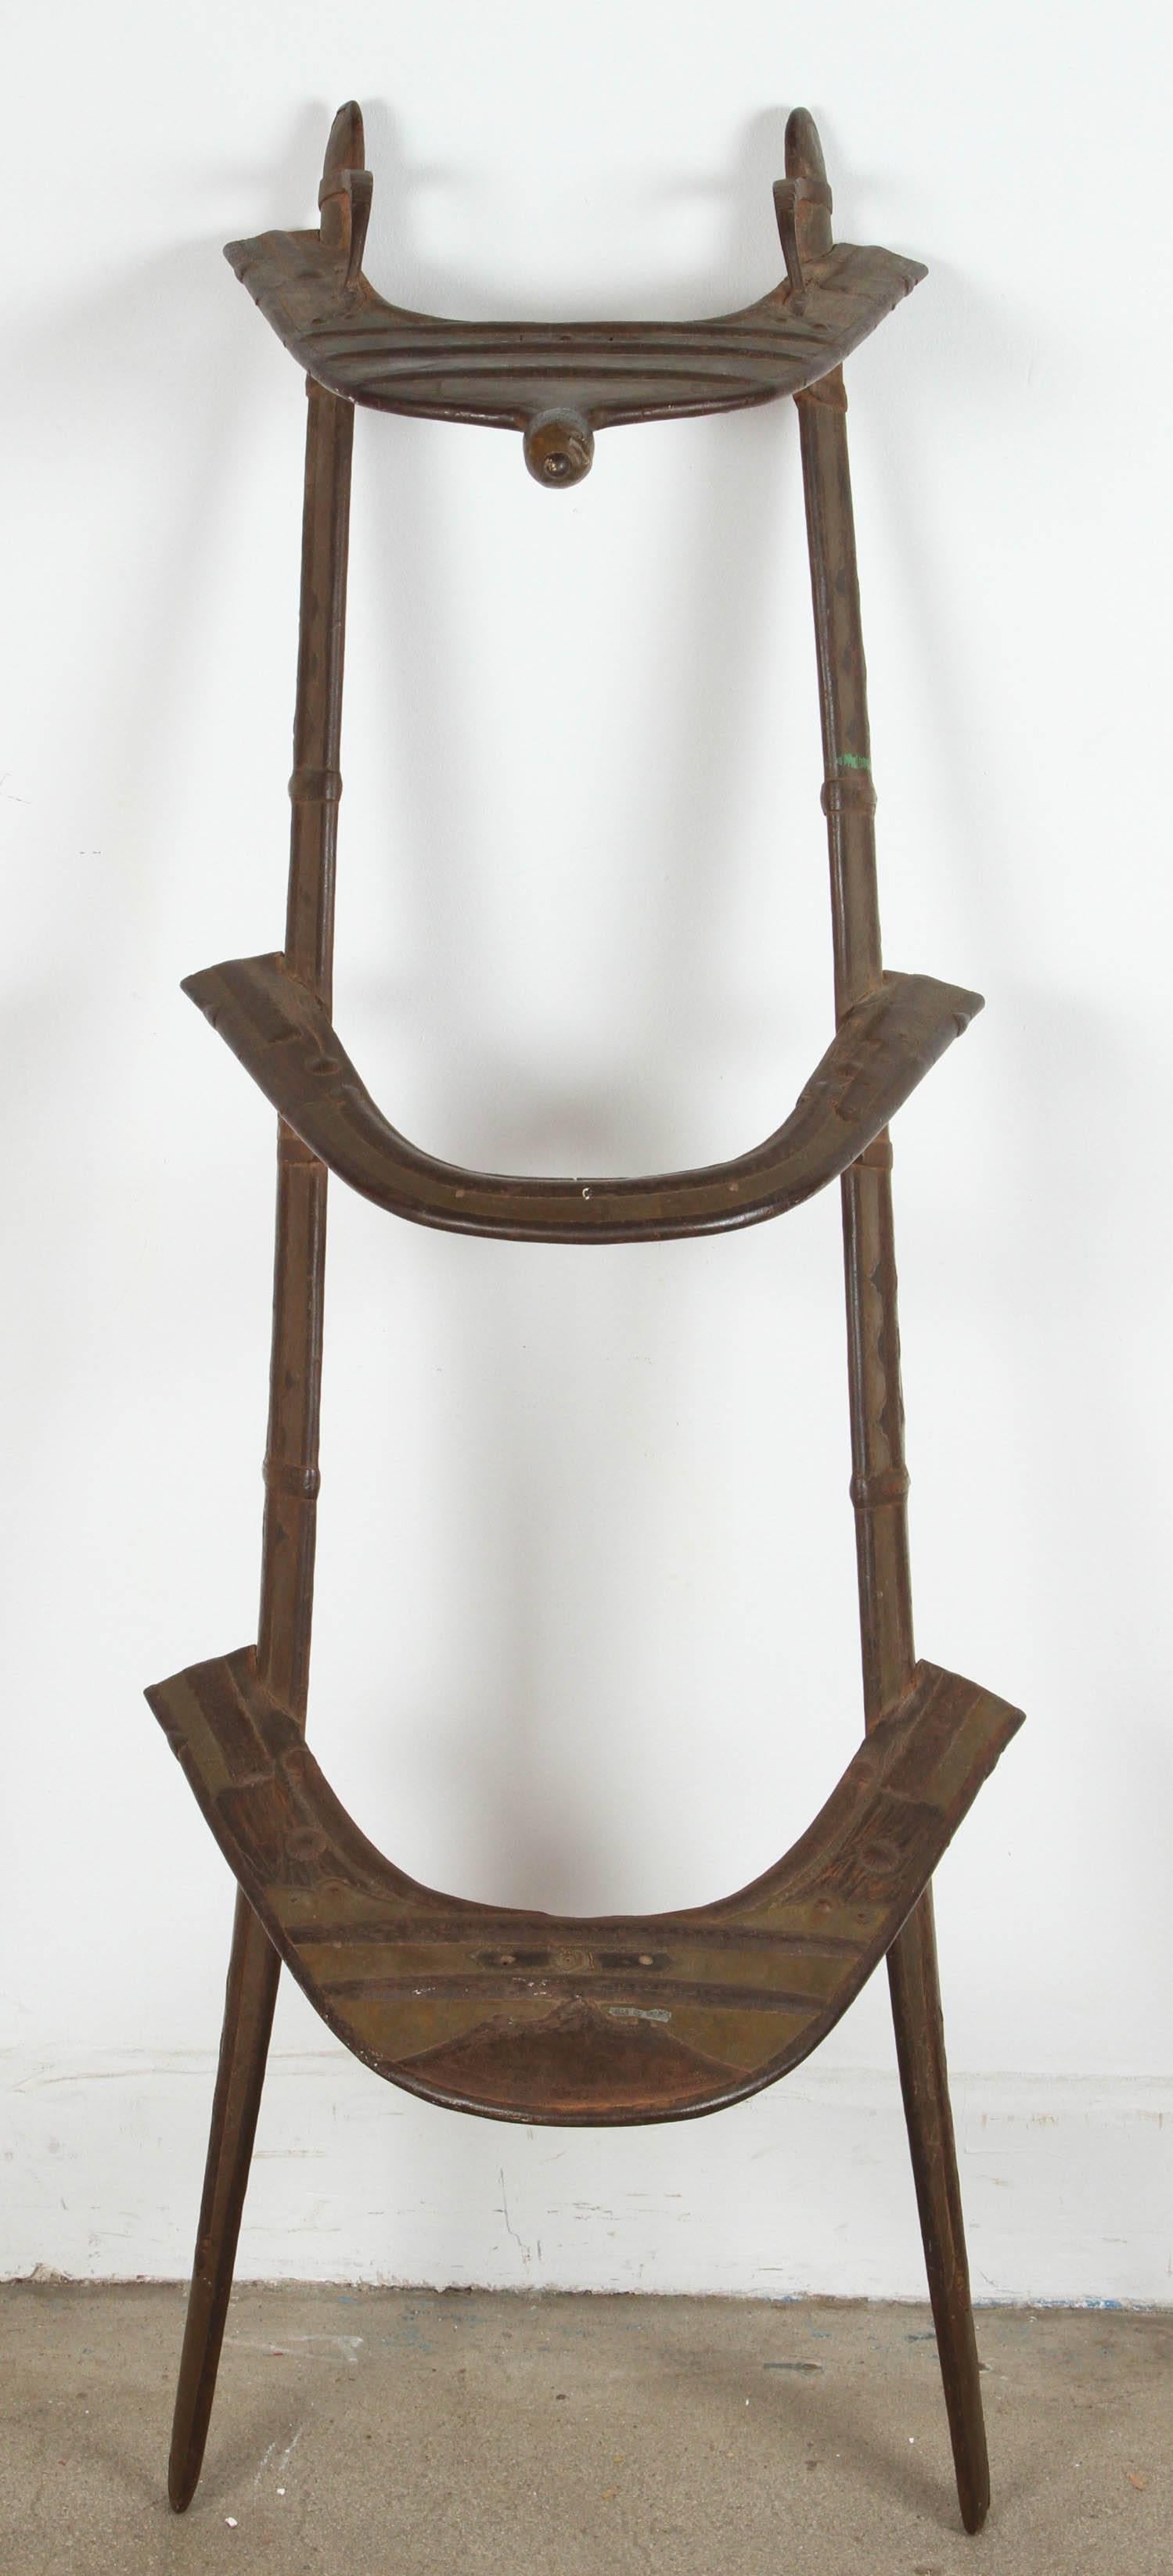 Egyptian Wood and Brass Antique 19th Century Middle Eastern Camel Seat Saddle For Sale